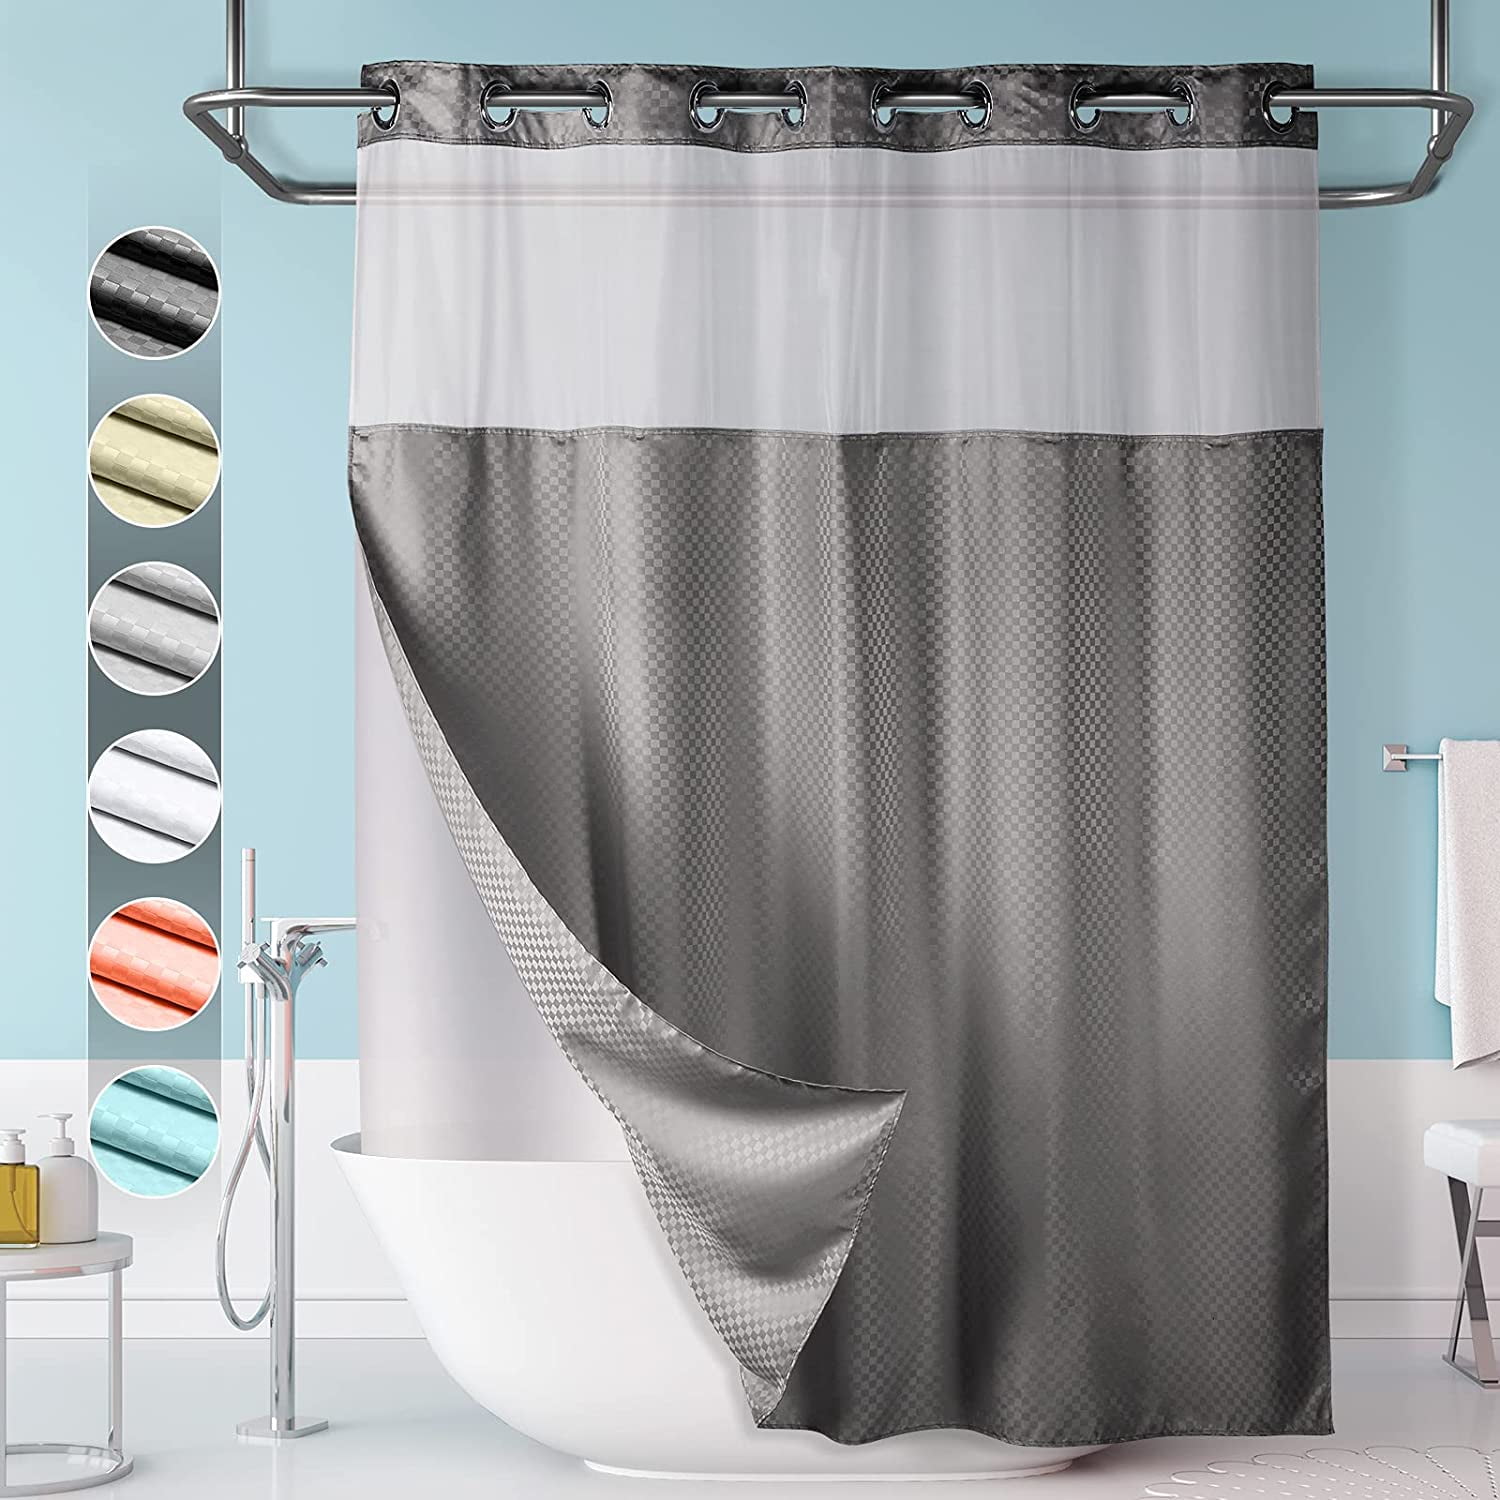 71x 74 Bathroom Curtain with Removable Polyester Liner Lagute SnapHook Shower Curtain w/Snap-in Liner | Translucent See-Through Window and Anti-Mold Waffle Fabric Bathtub Curtain 